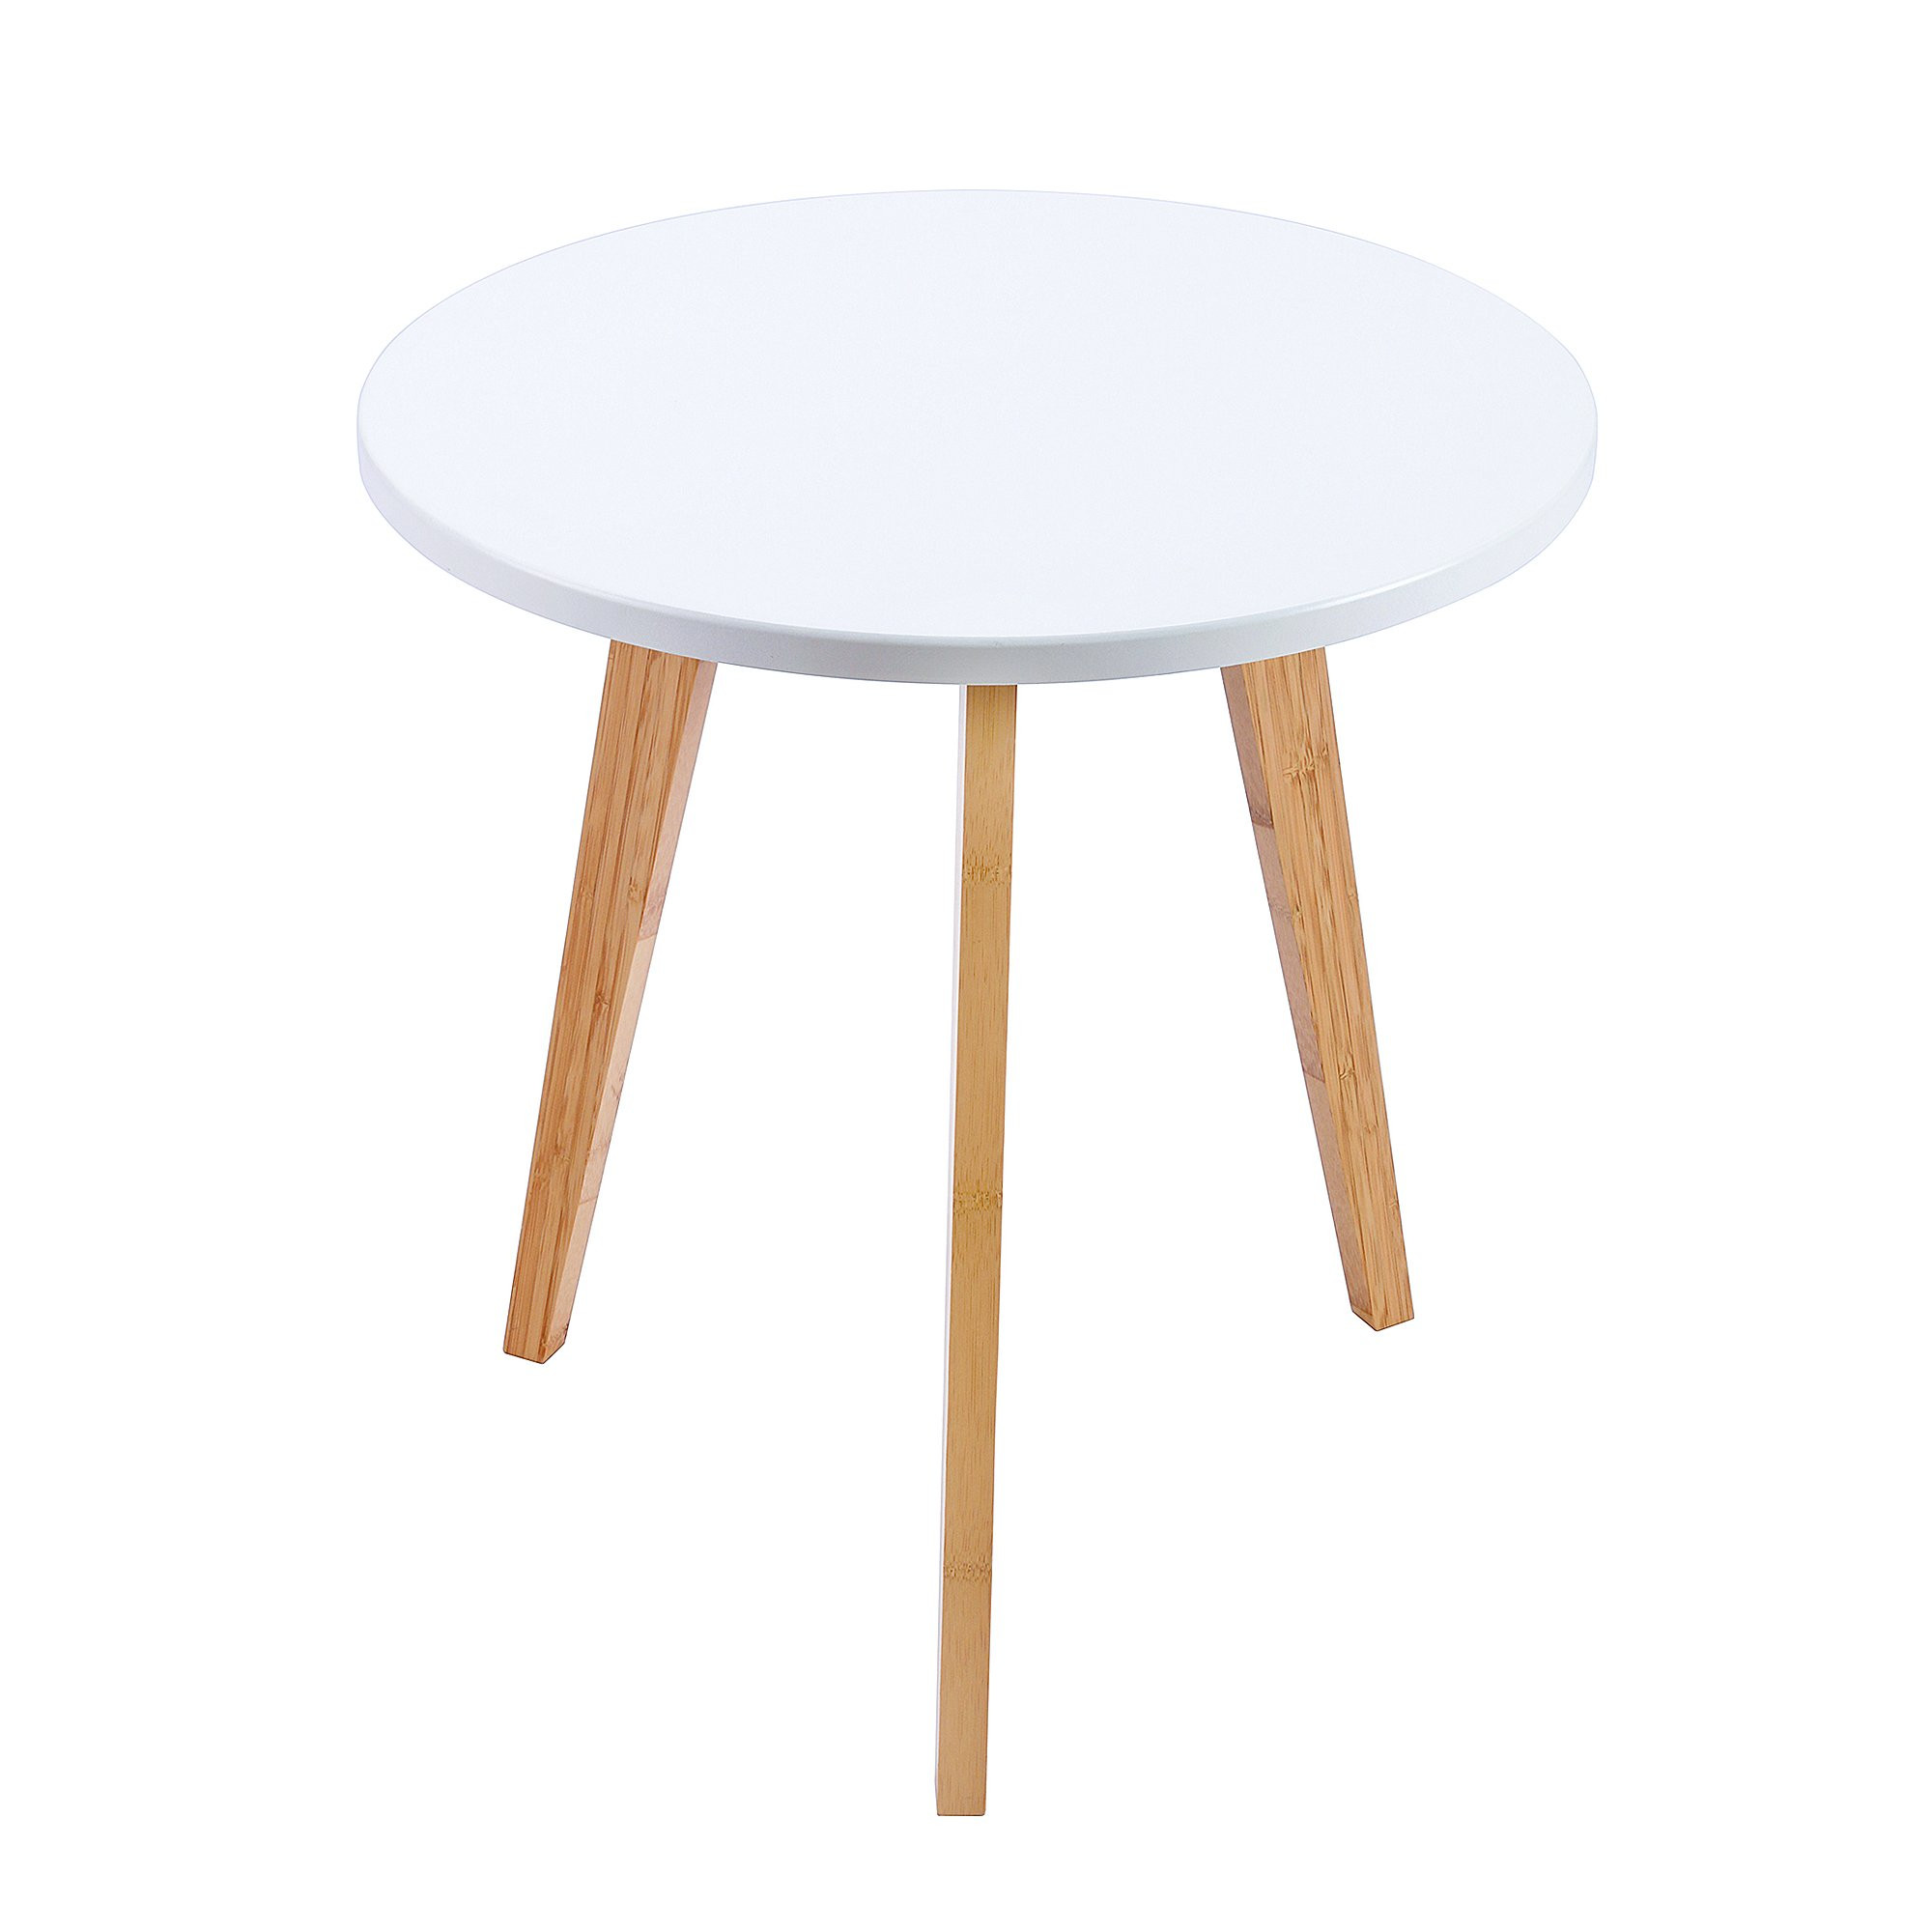 Small Bedroom Side Tables
 WILSHINE Small Round End Table for Small Spaces in Living